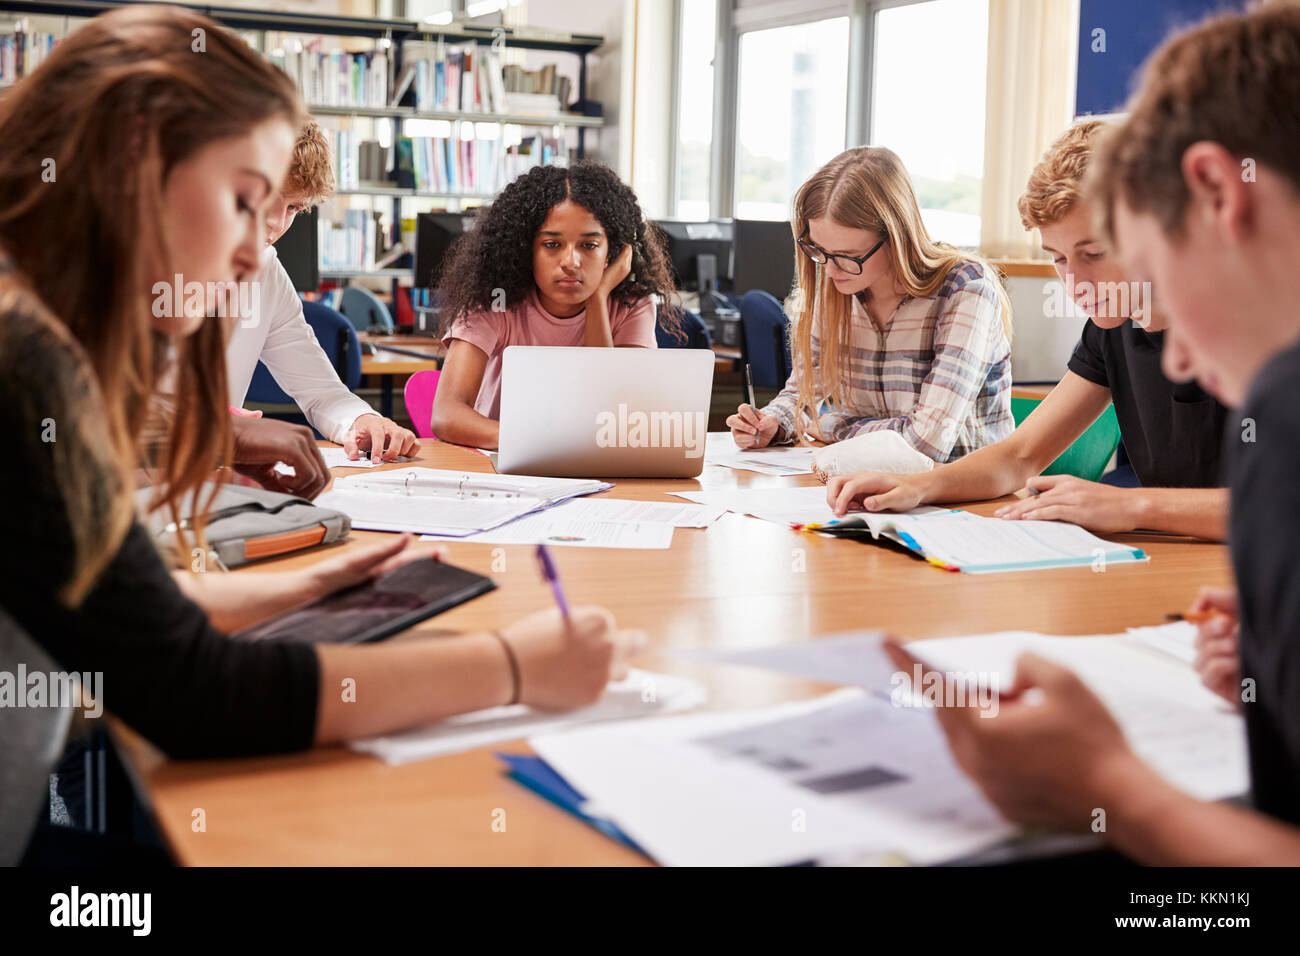 Group Of College Students Working Around Table In Library Stock Photo